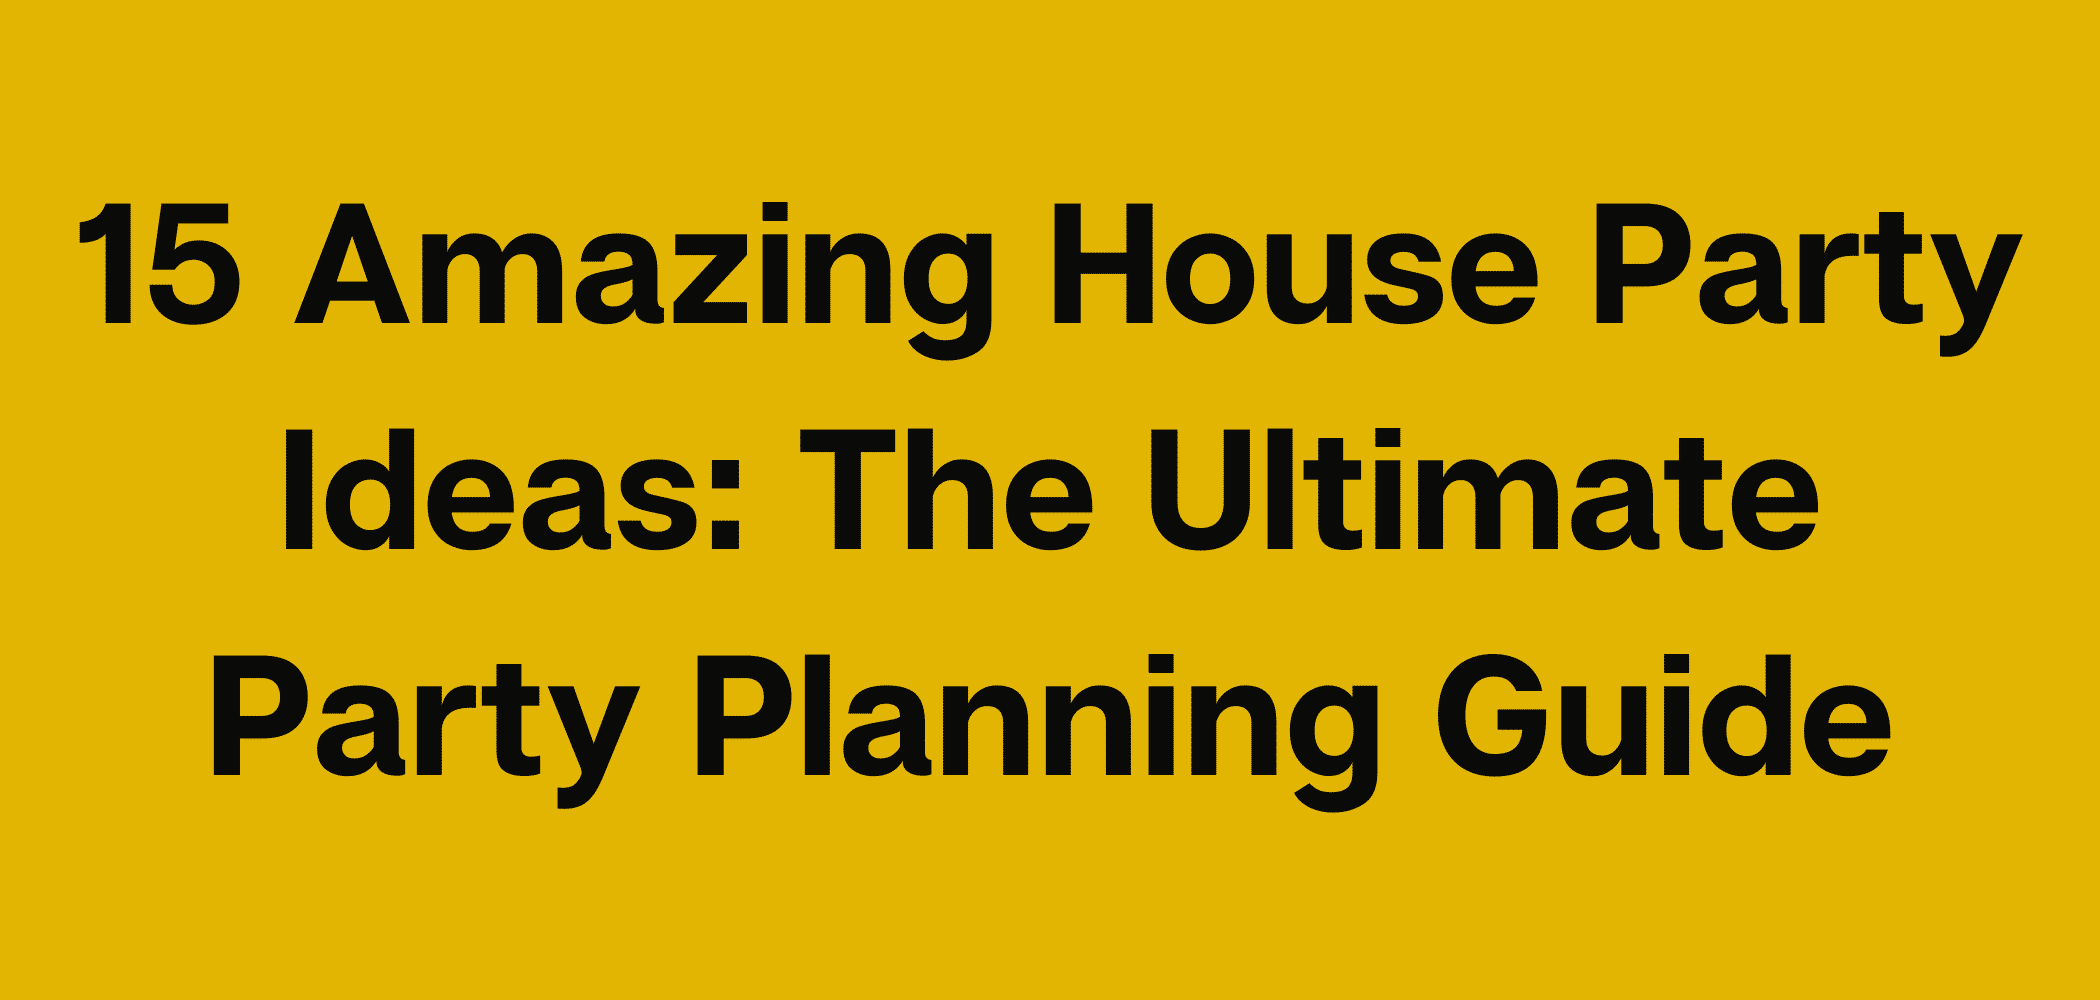 A Guide To Planning A Housewarming Party: Details, Quick Ideas and